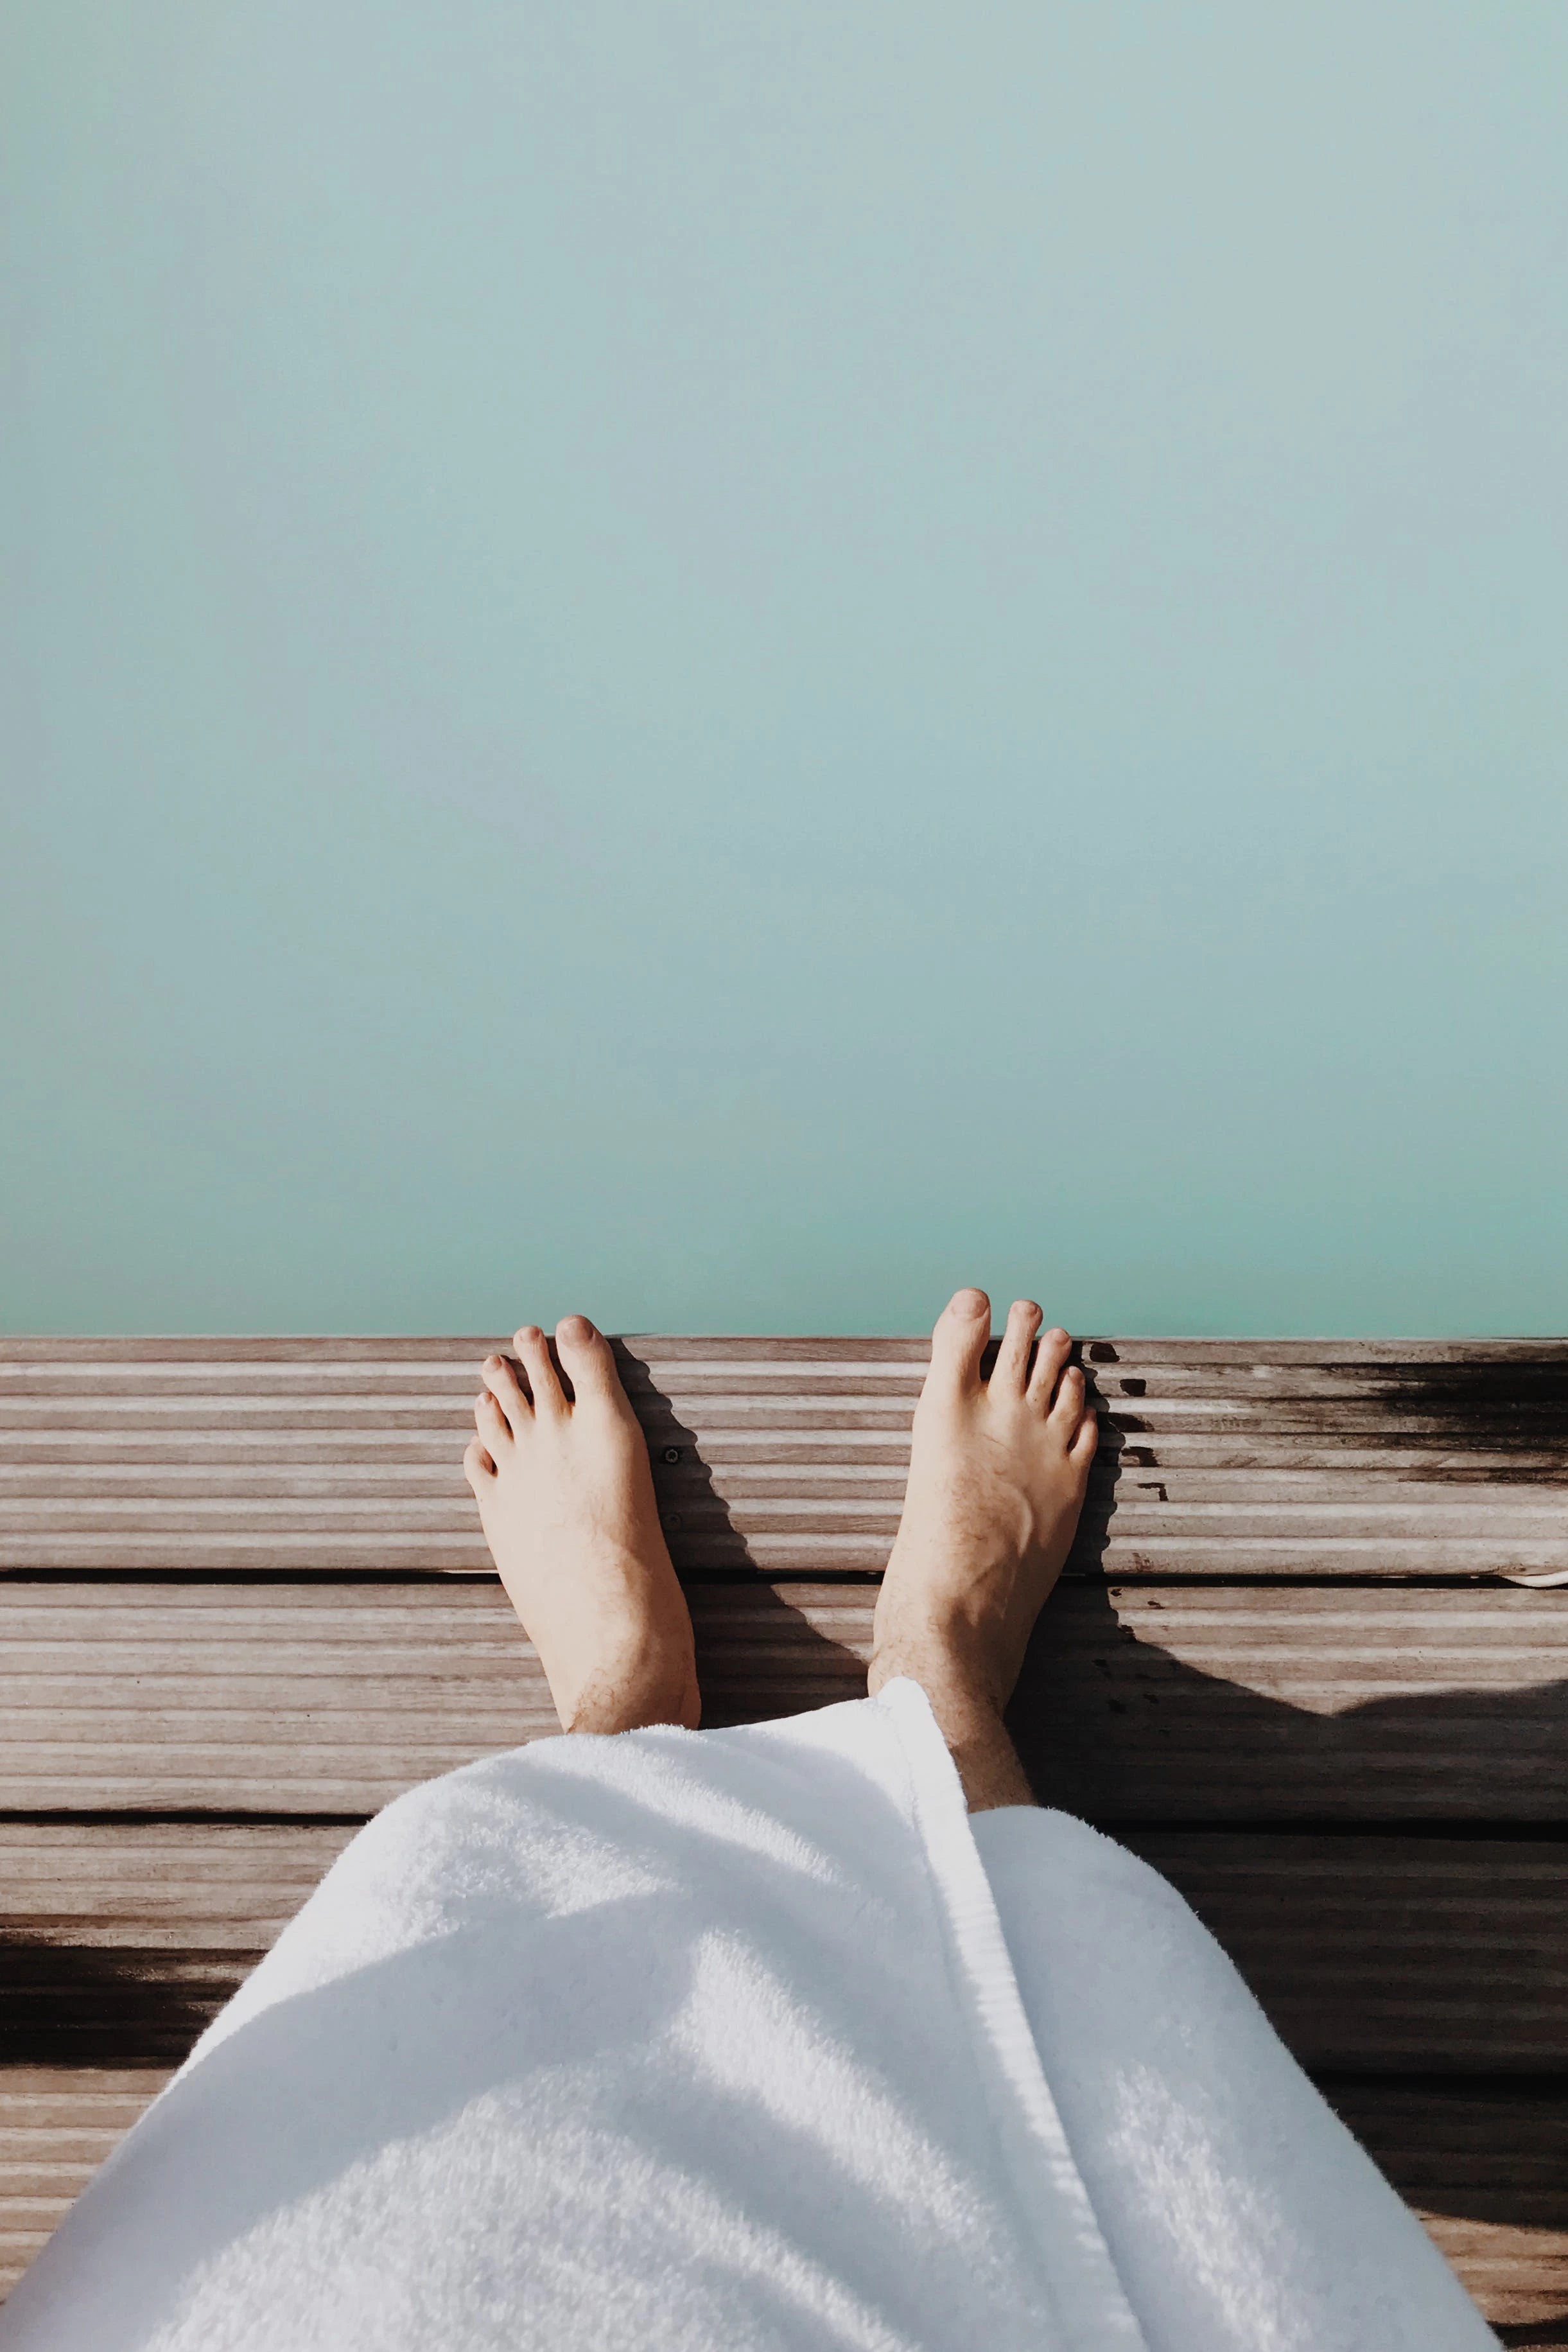 Feet on a wooden jetty